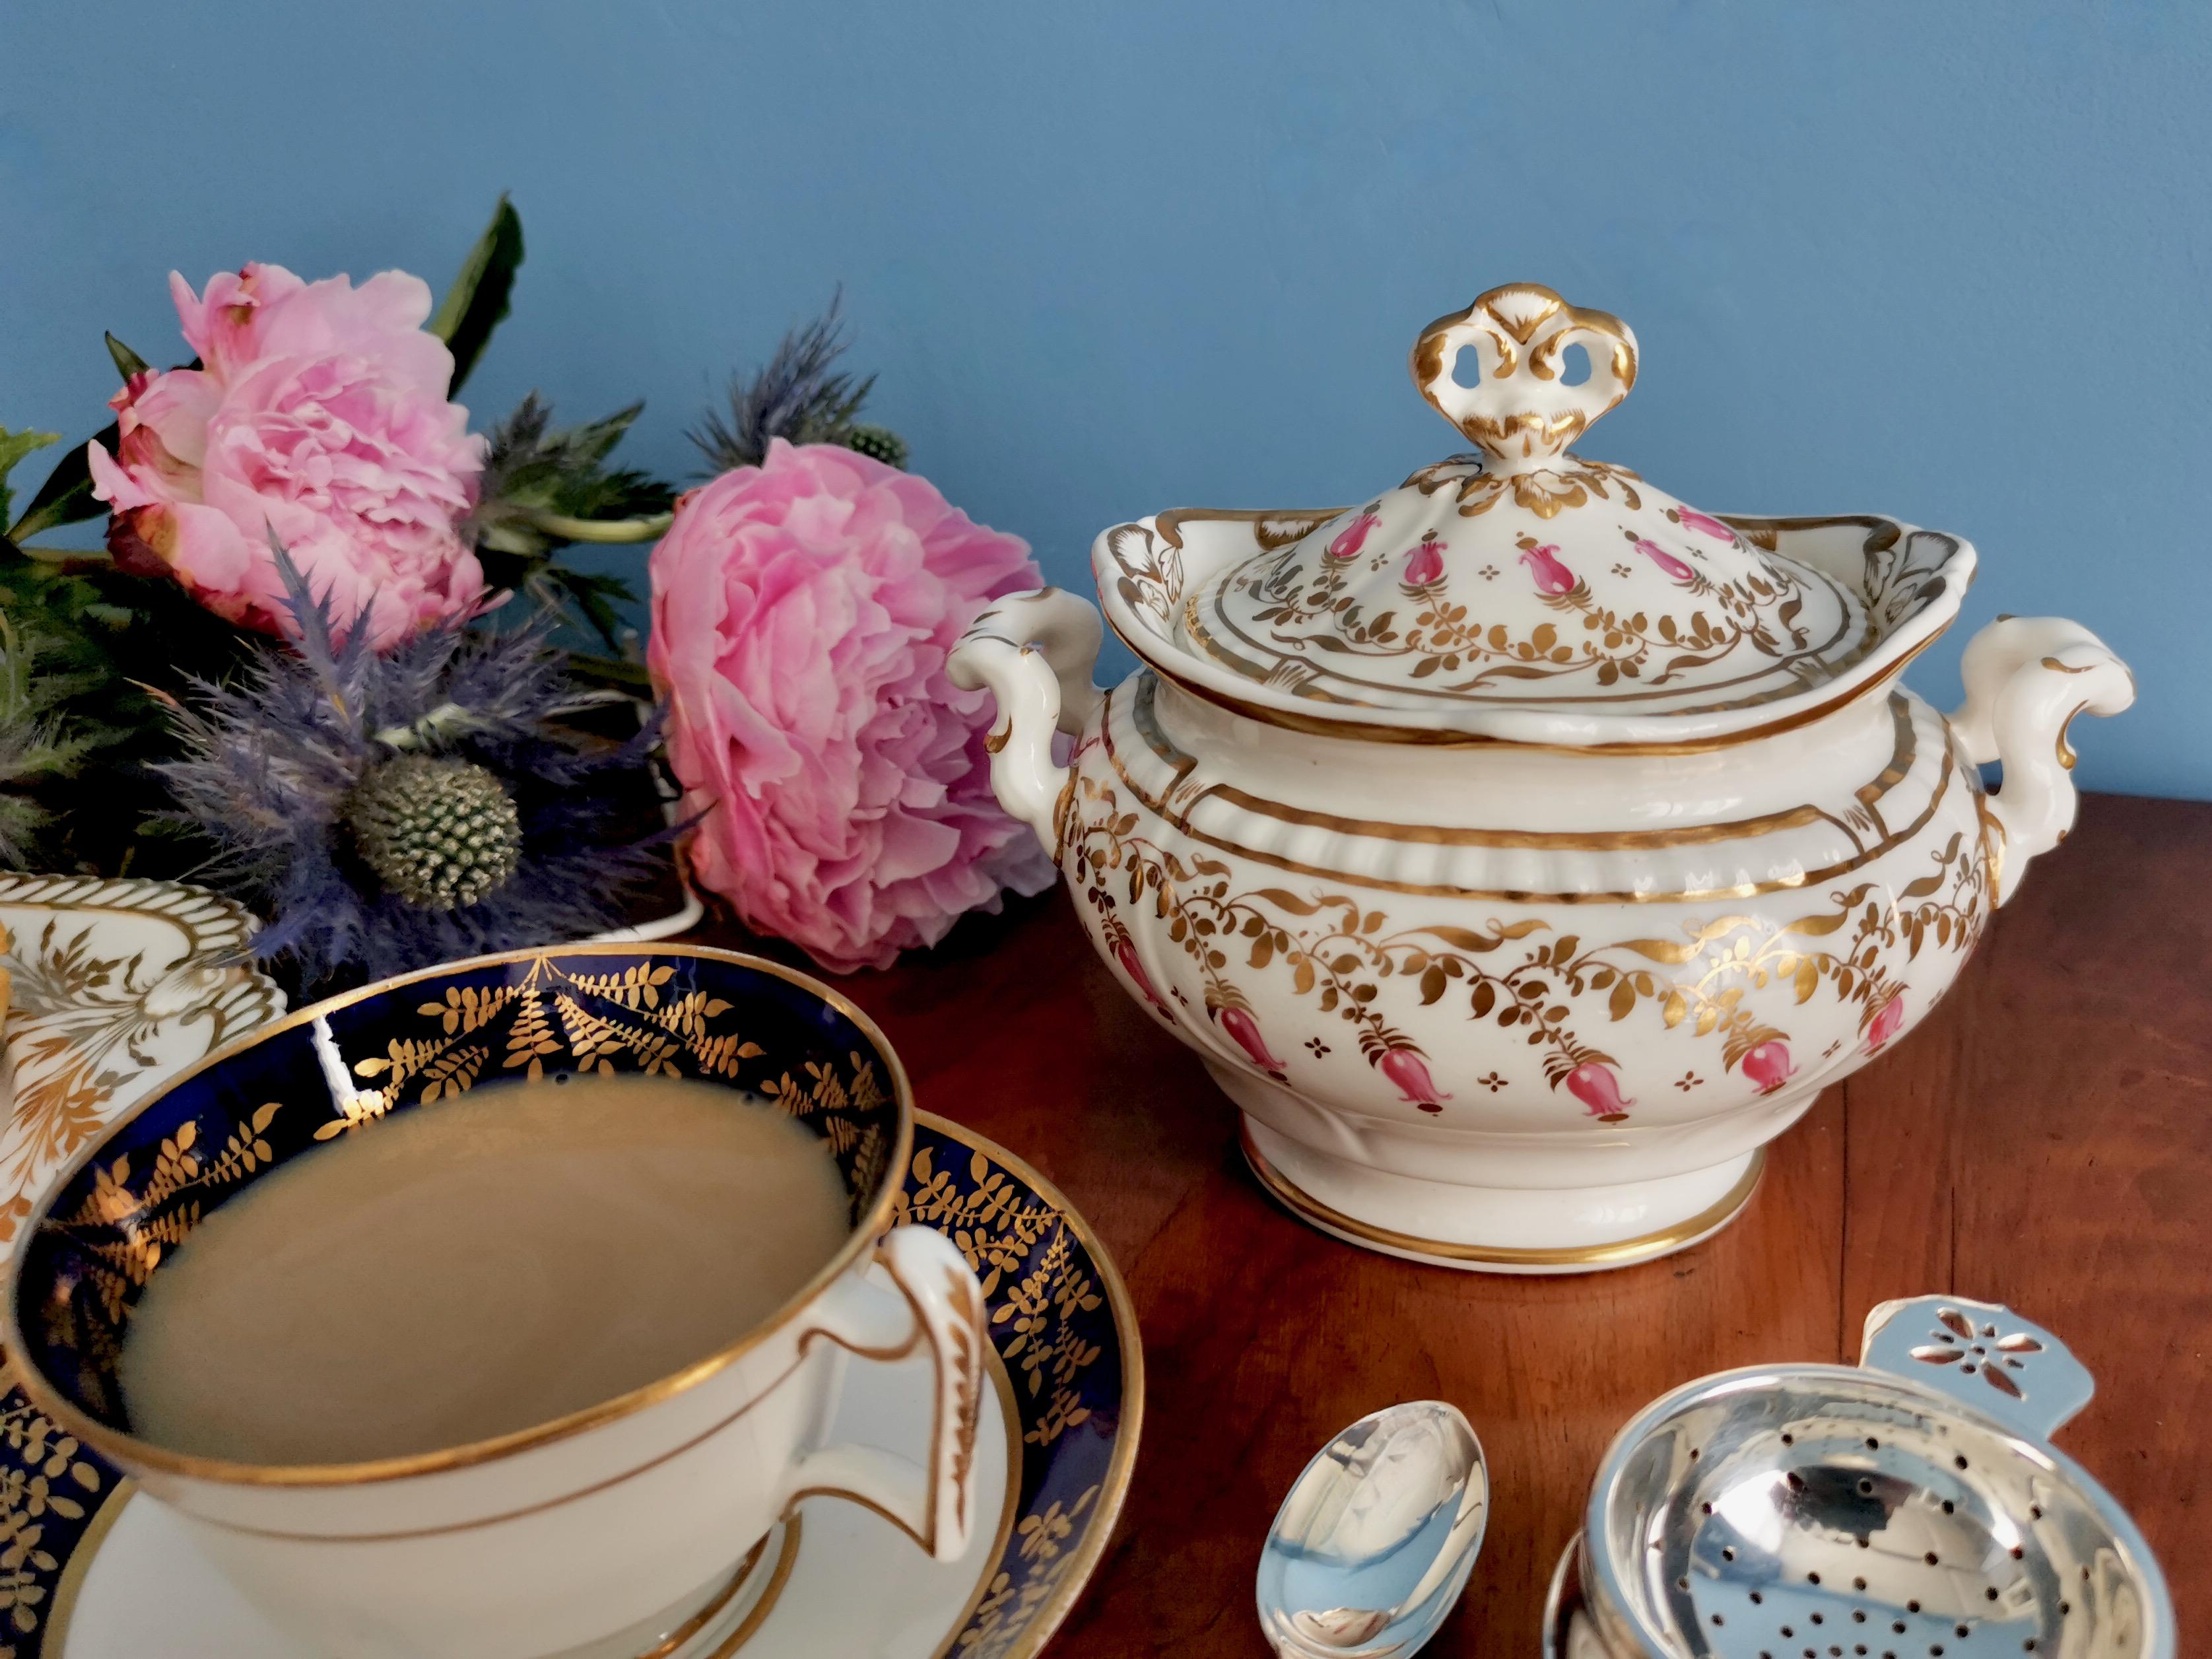 This is a beautiful lidded sucrier made by Spode in or shortly after 1828. The sucrier is made in Felspar porcelain and has a beautifully moulded shape with a crown-like shaped finial. It is decorated in a pink and gilt harebell pattern.
 
Spode